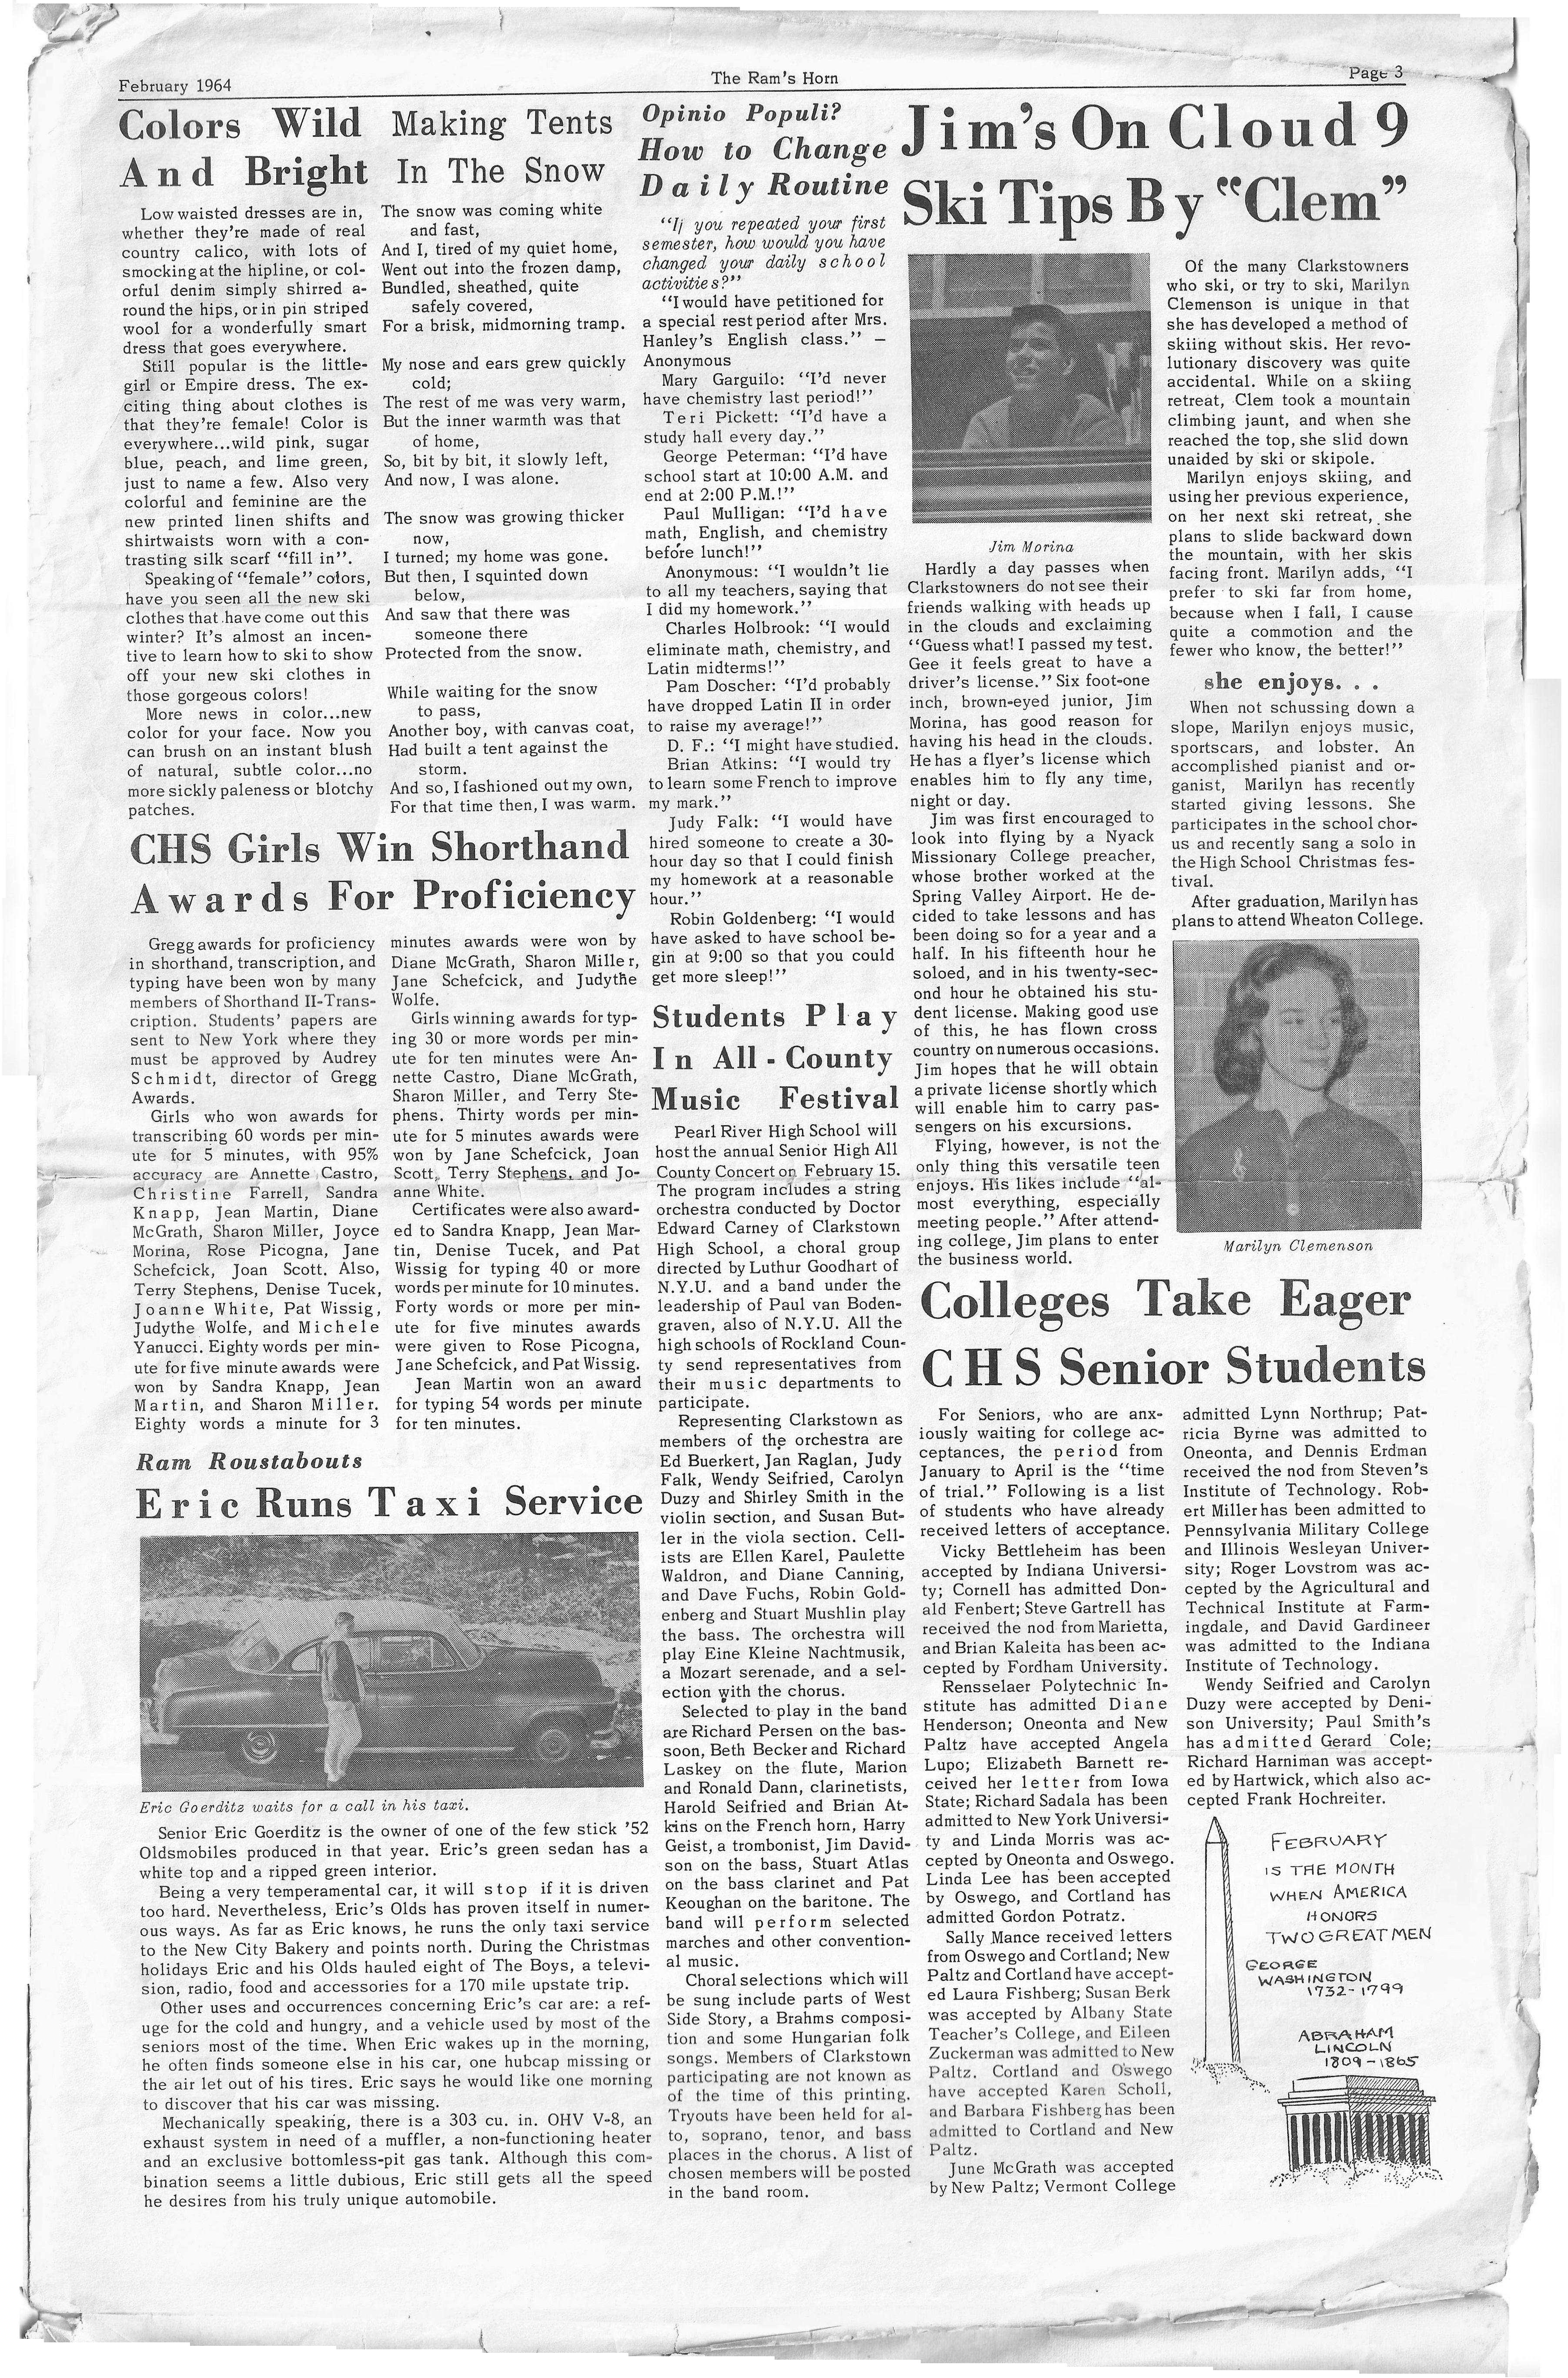 The Ram's Horn - Feb. '64 - Page 3